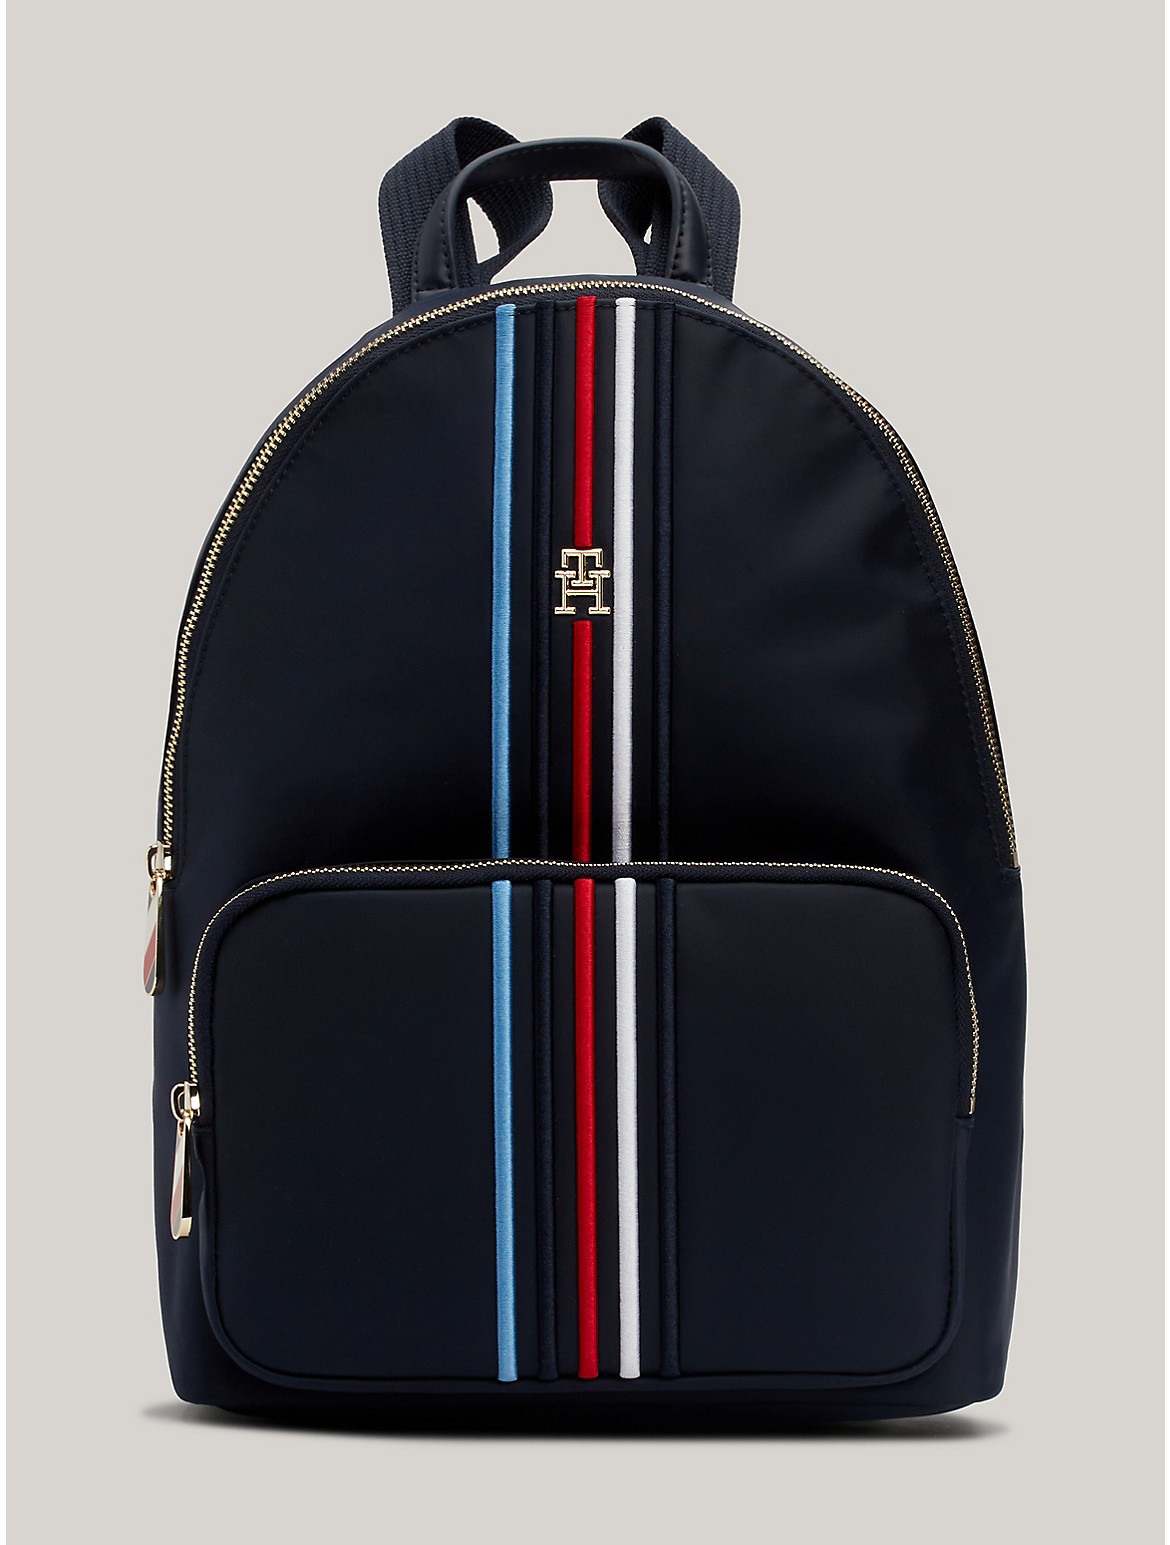 Tommy Hilfiger Women's TH Stripe Dome Backpack